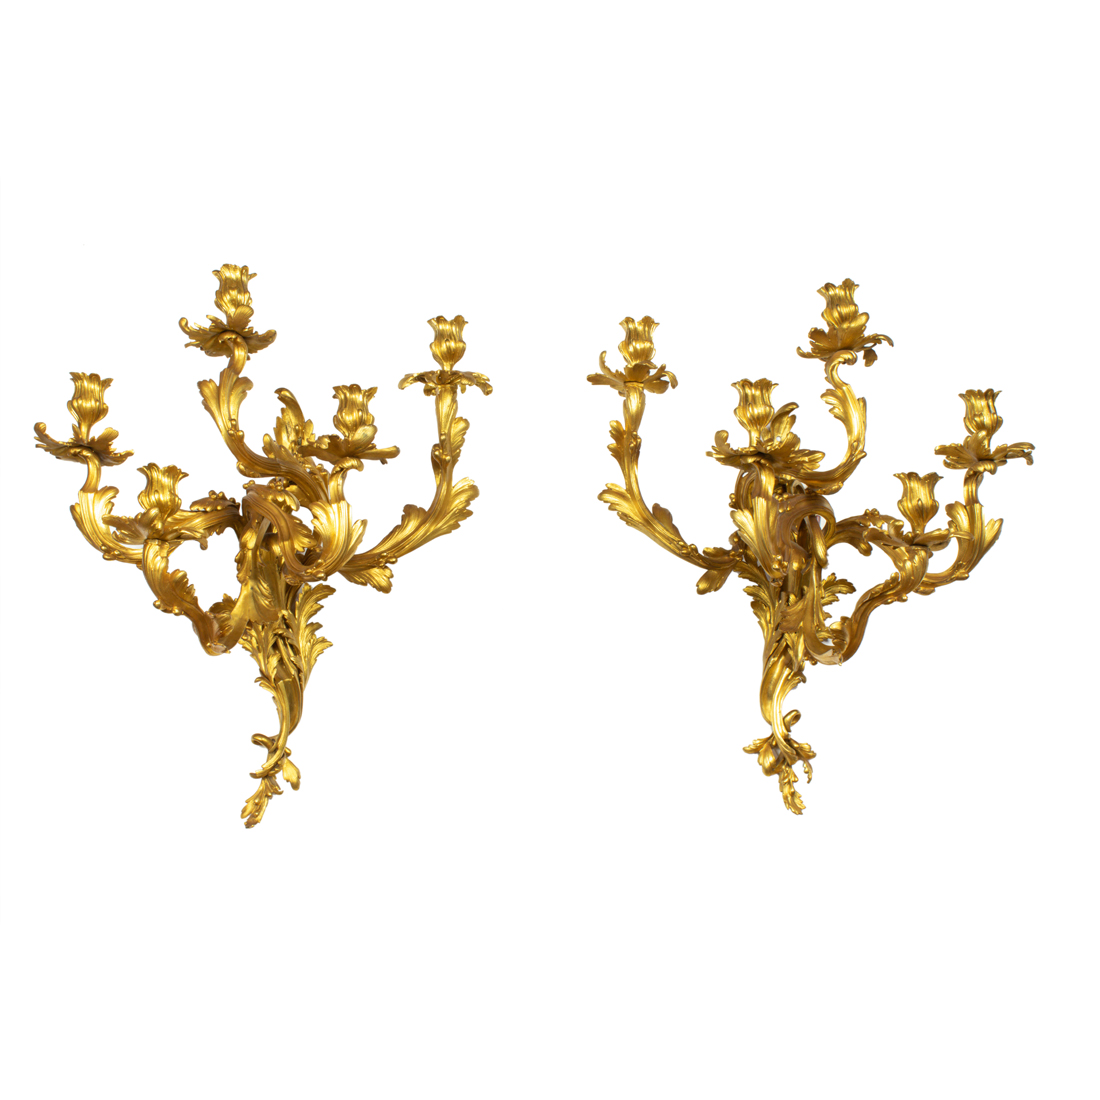 A PAIR OF LOUIS XV STYLE FIVE LIGHT